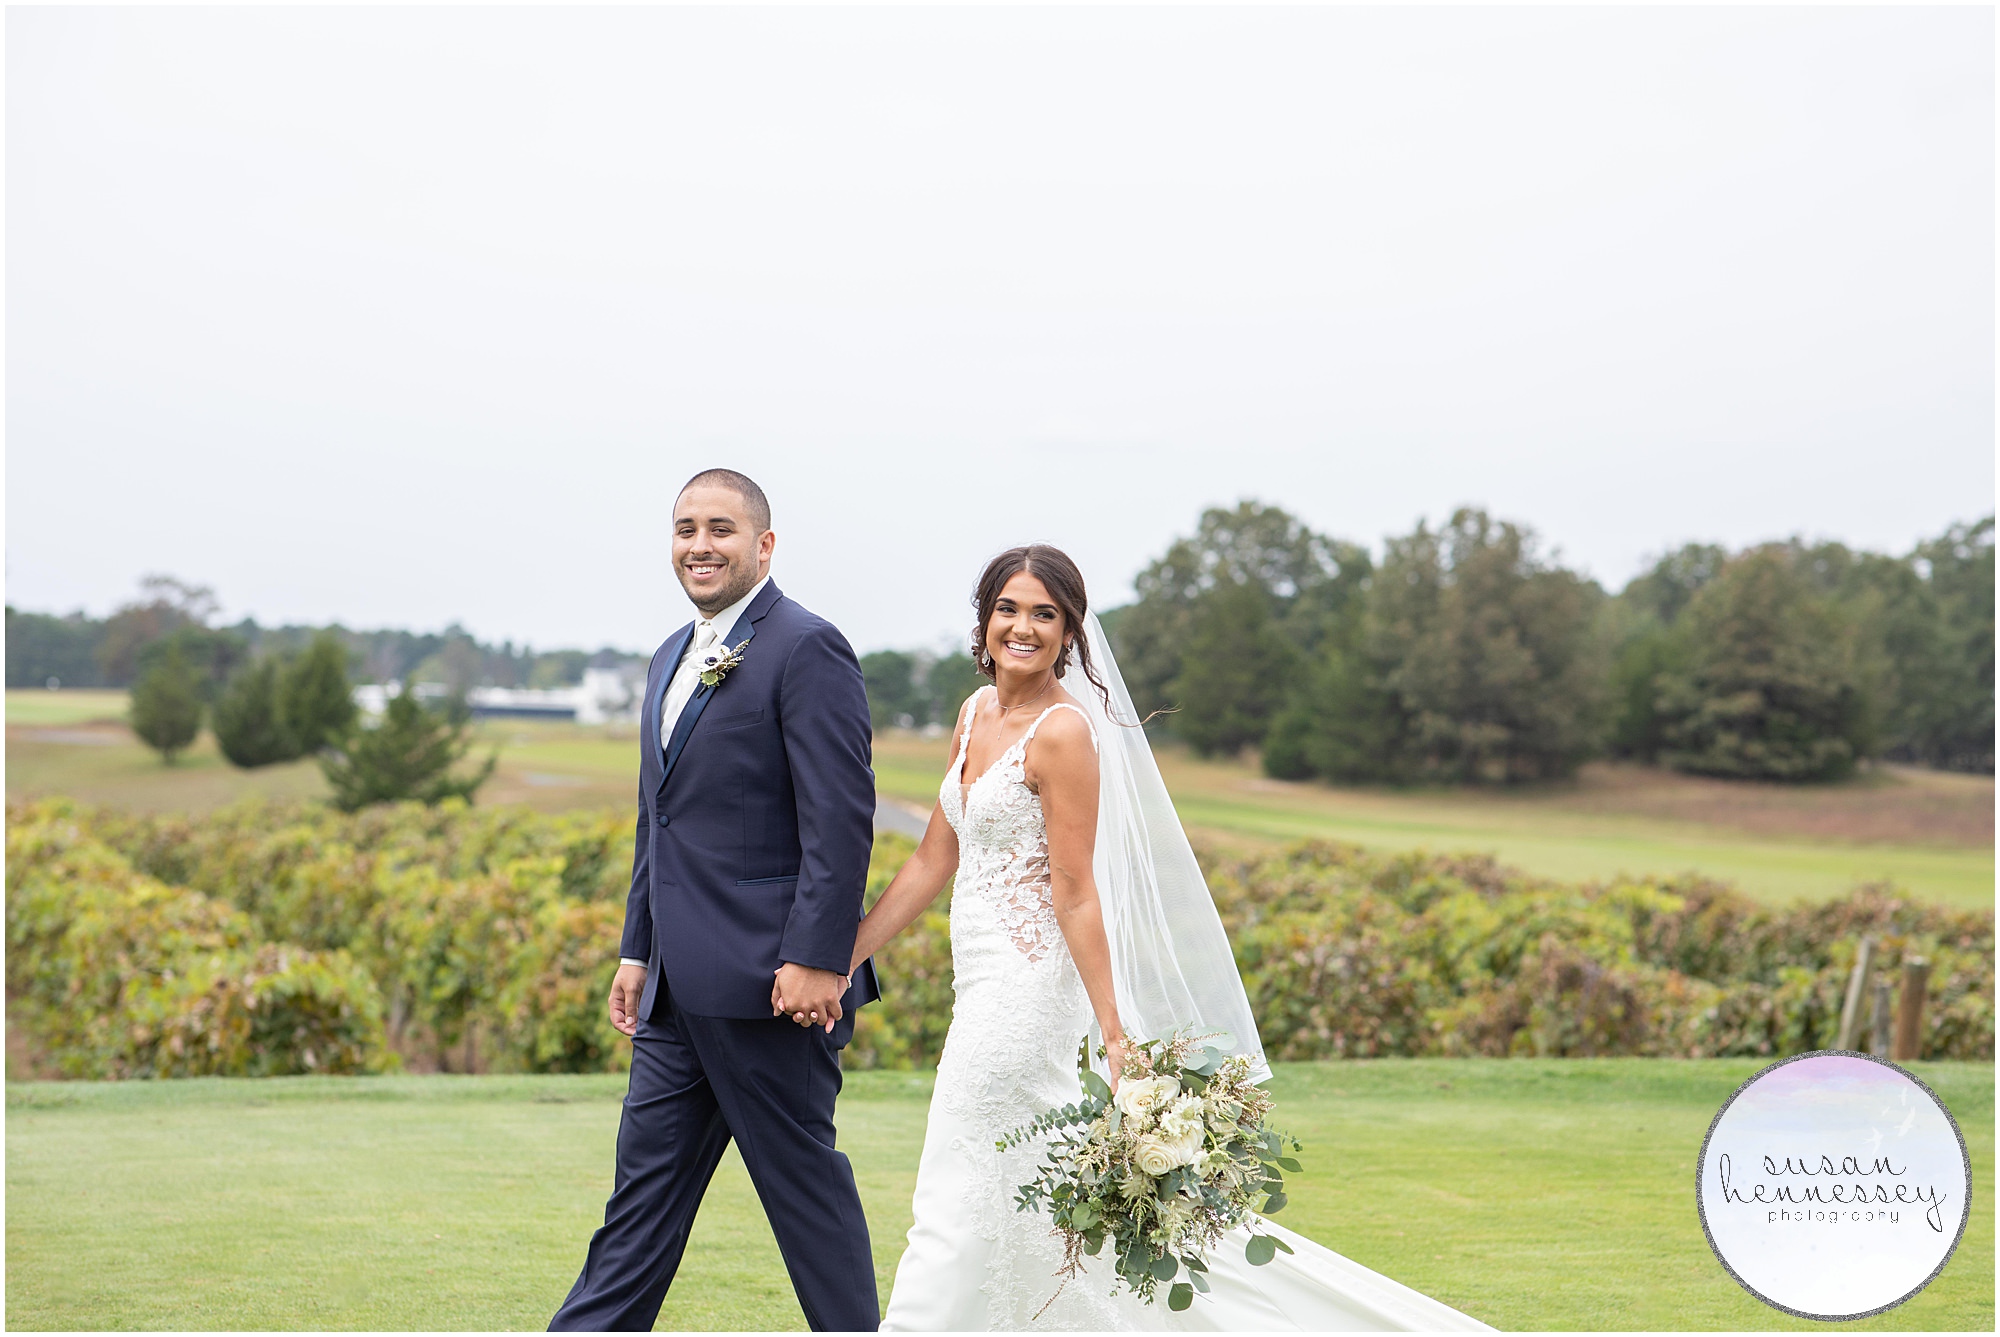 A bride and groom walk across the golf course on their wedding day